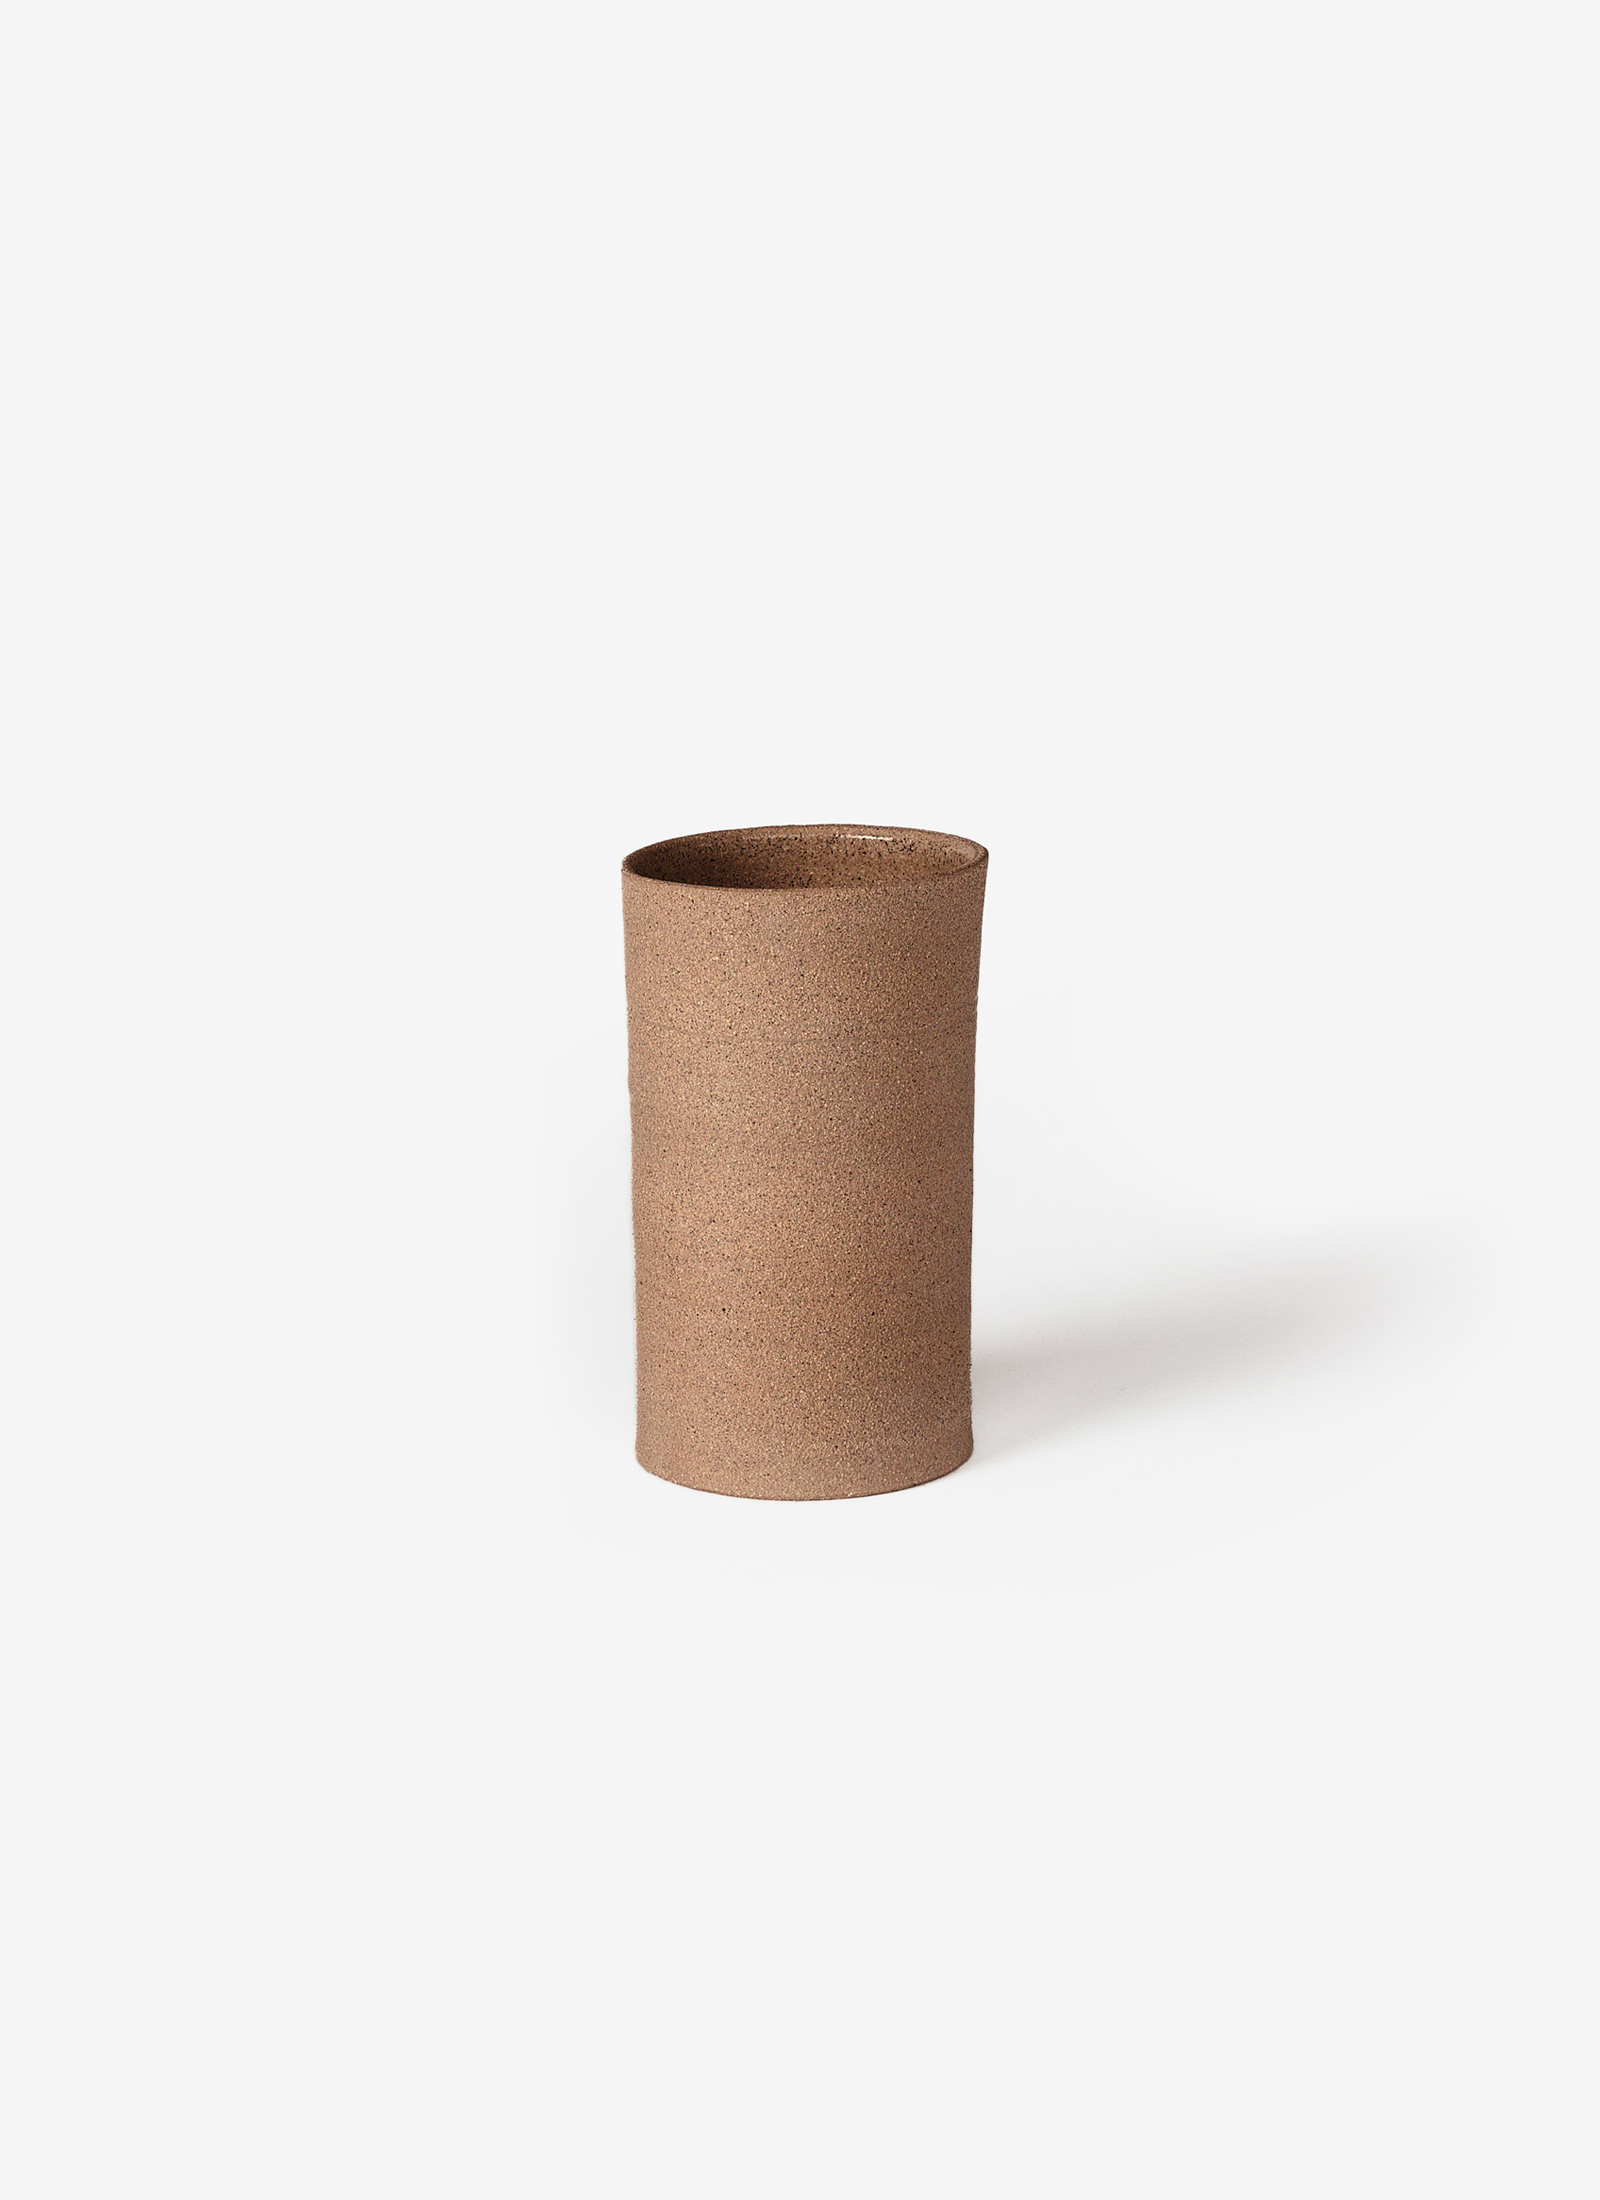 Hollow Vase - Leather